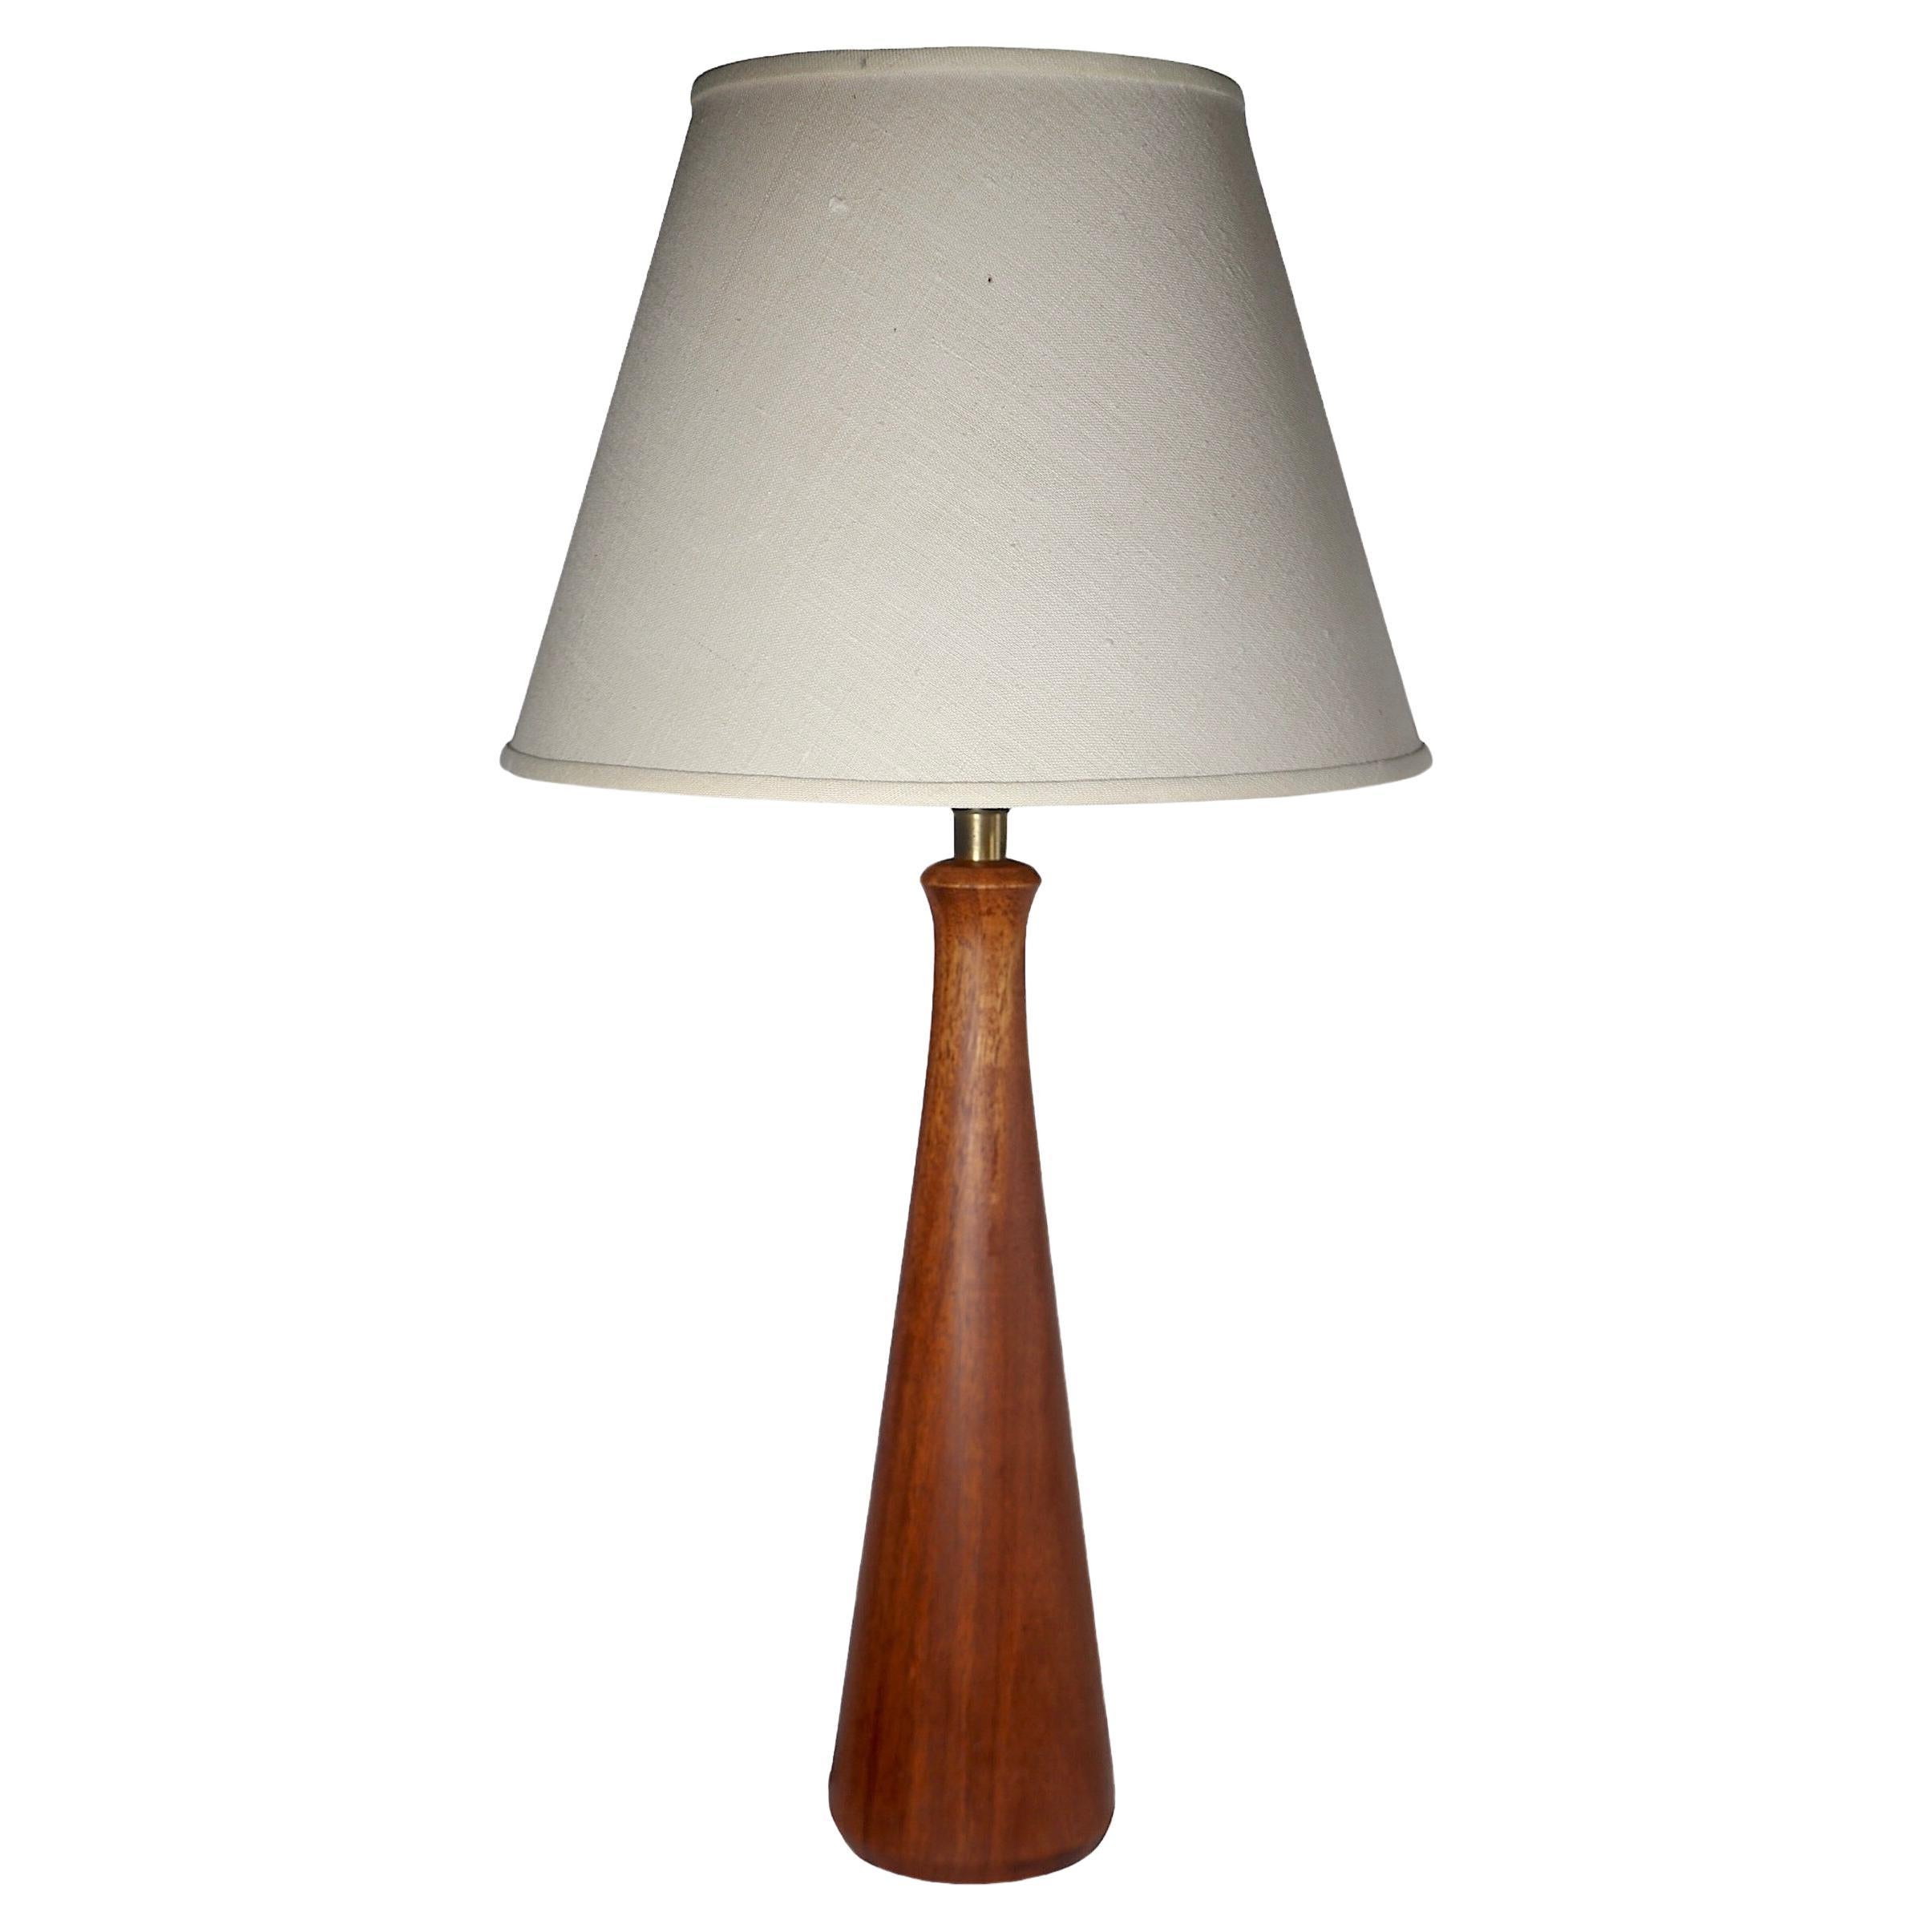  Danish Style Mid Century Wood Table Lamp c 1950/60's For Sale